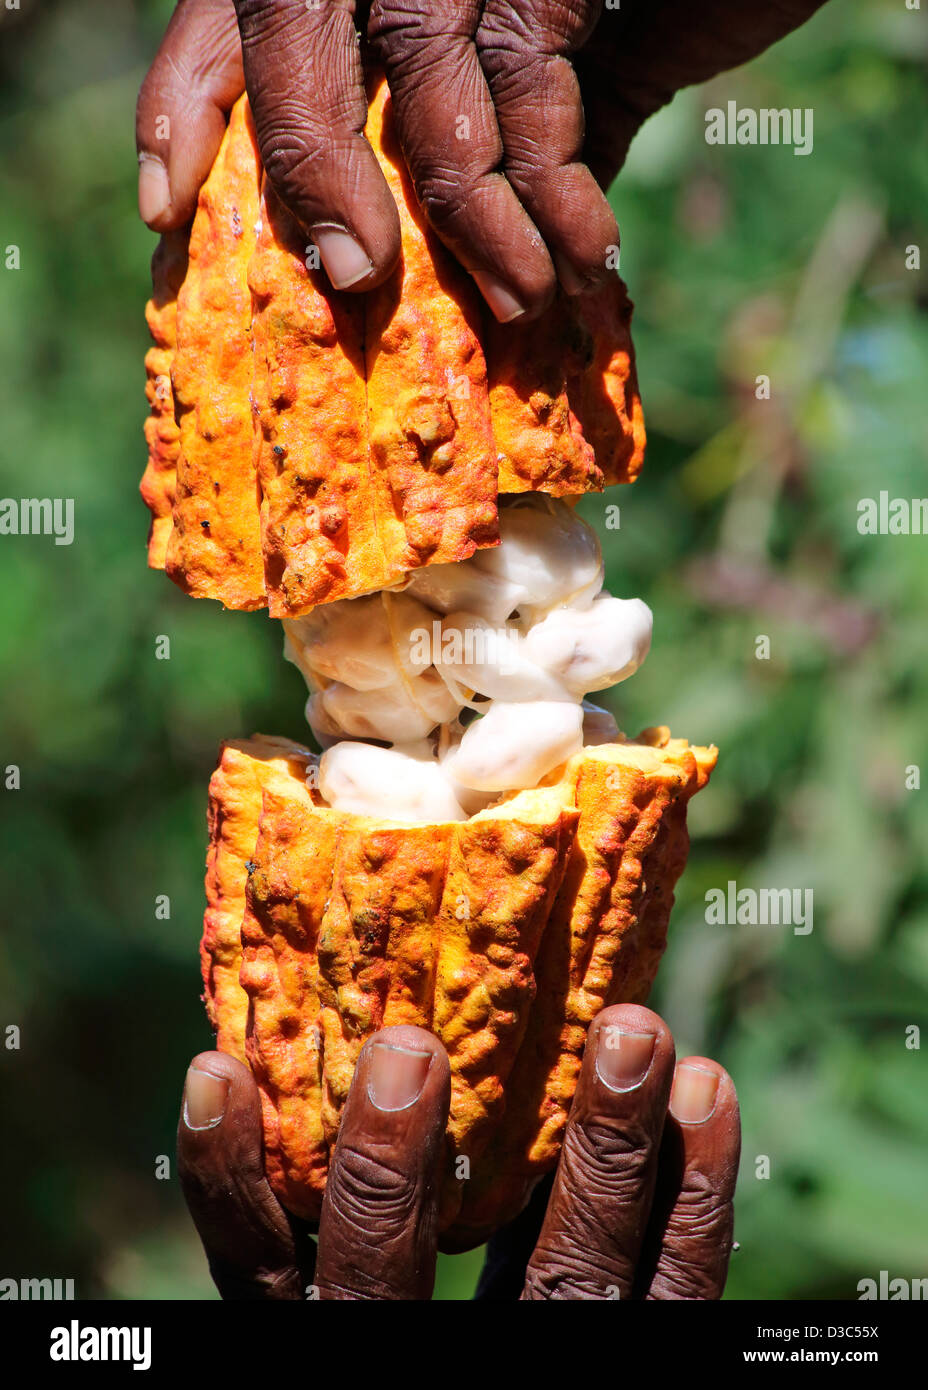 MAN HOLDING FRESH CACAO POD WITH COCOA BEANS Stock Photo